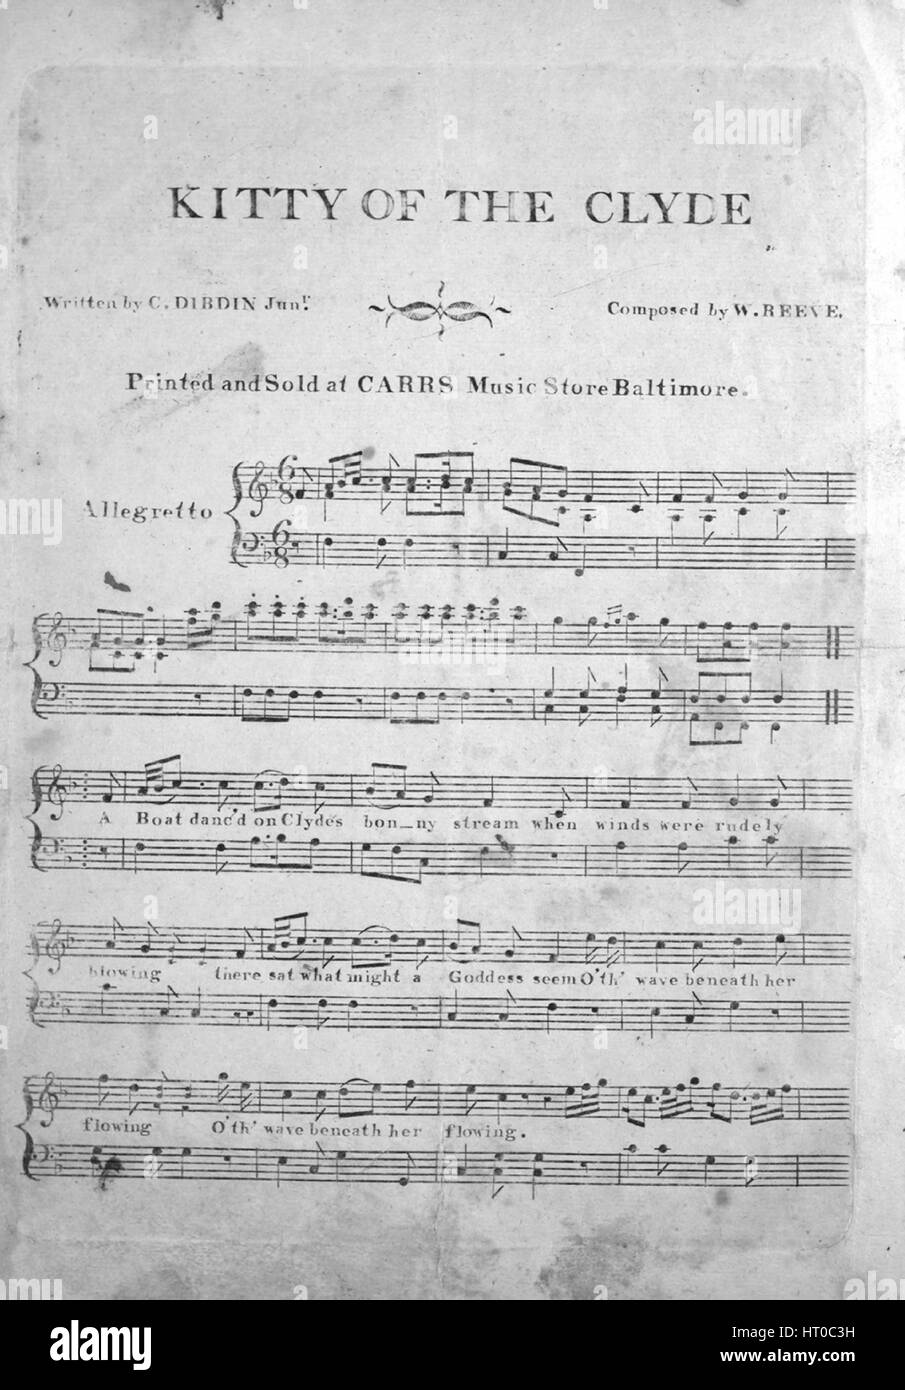 Sheet music cover image of the song 'Kitty of the Clyde', with original authorship notes reading 'Written by C Dibdin Junr Composed by W Reeve', United States, 1900. The publisher is listed as 'Carr's Music Store', the form of composition is 'strophic with chorus', the instrumentation is 'piano and voice', the first line reads 'A Boat danc'd on Clydes bonny stream when winds were rudely blowing', and the illustration artist is listed as 'None'. Stock Photo